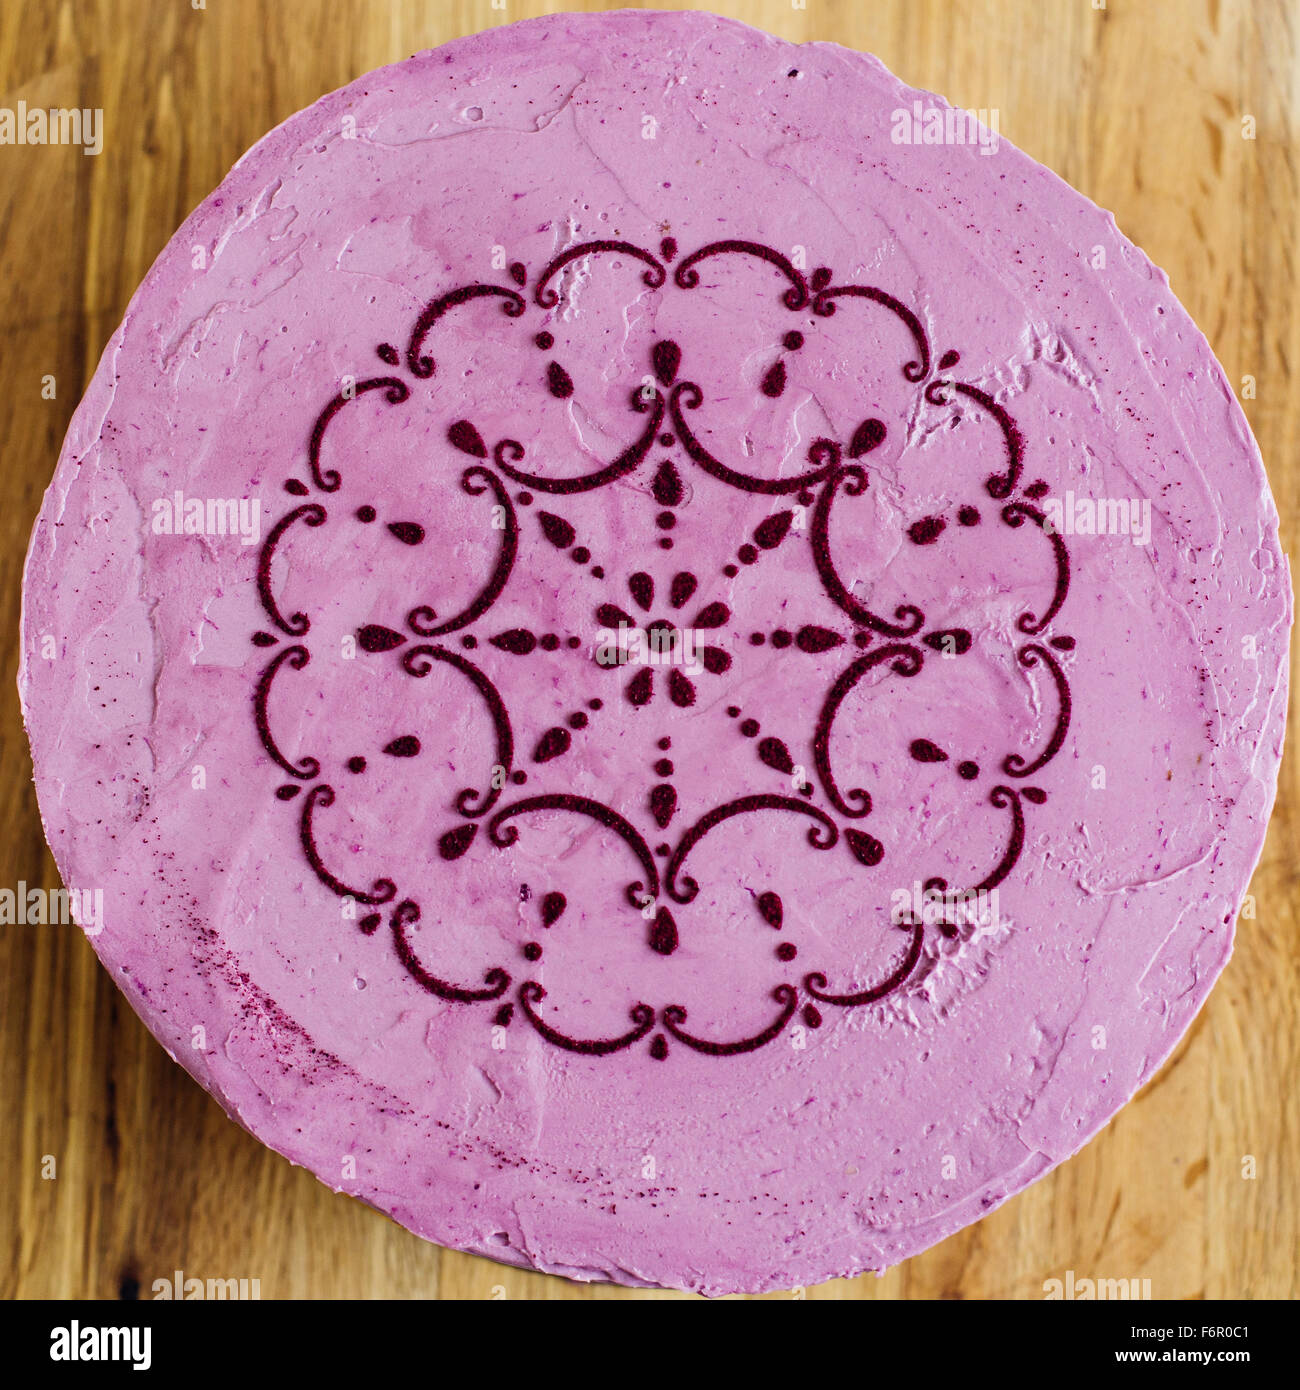 beautiful lilac homemade cake with ethnic pattern from above Stock Photo